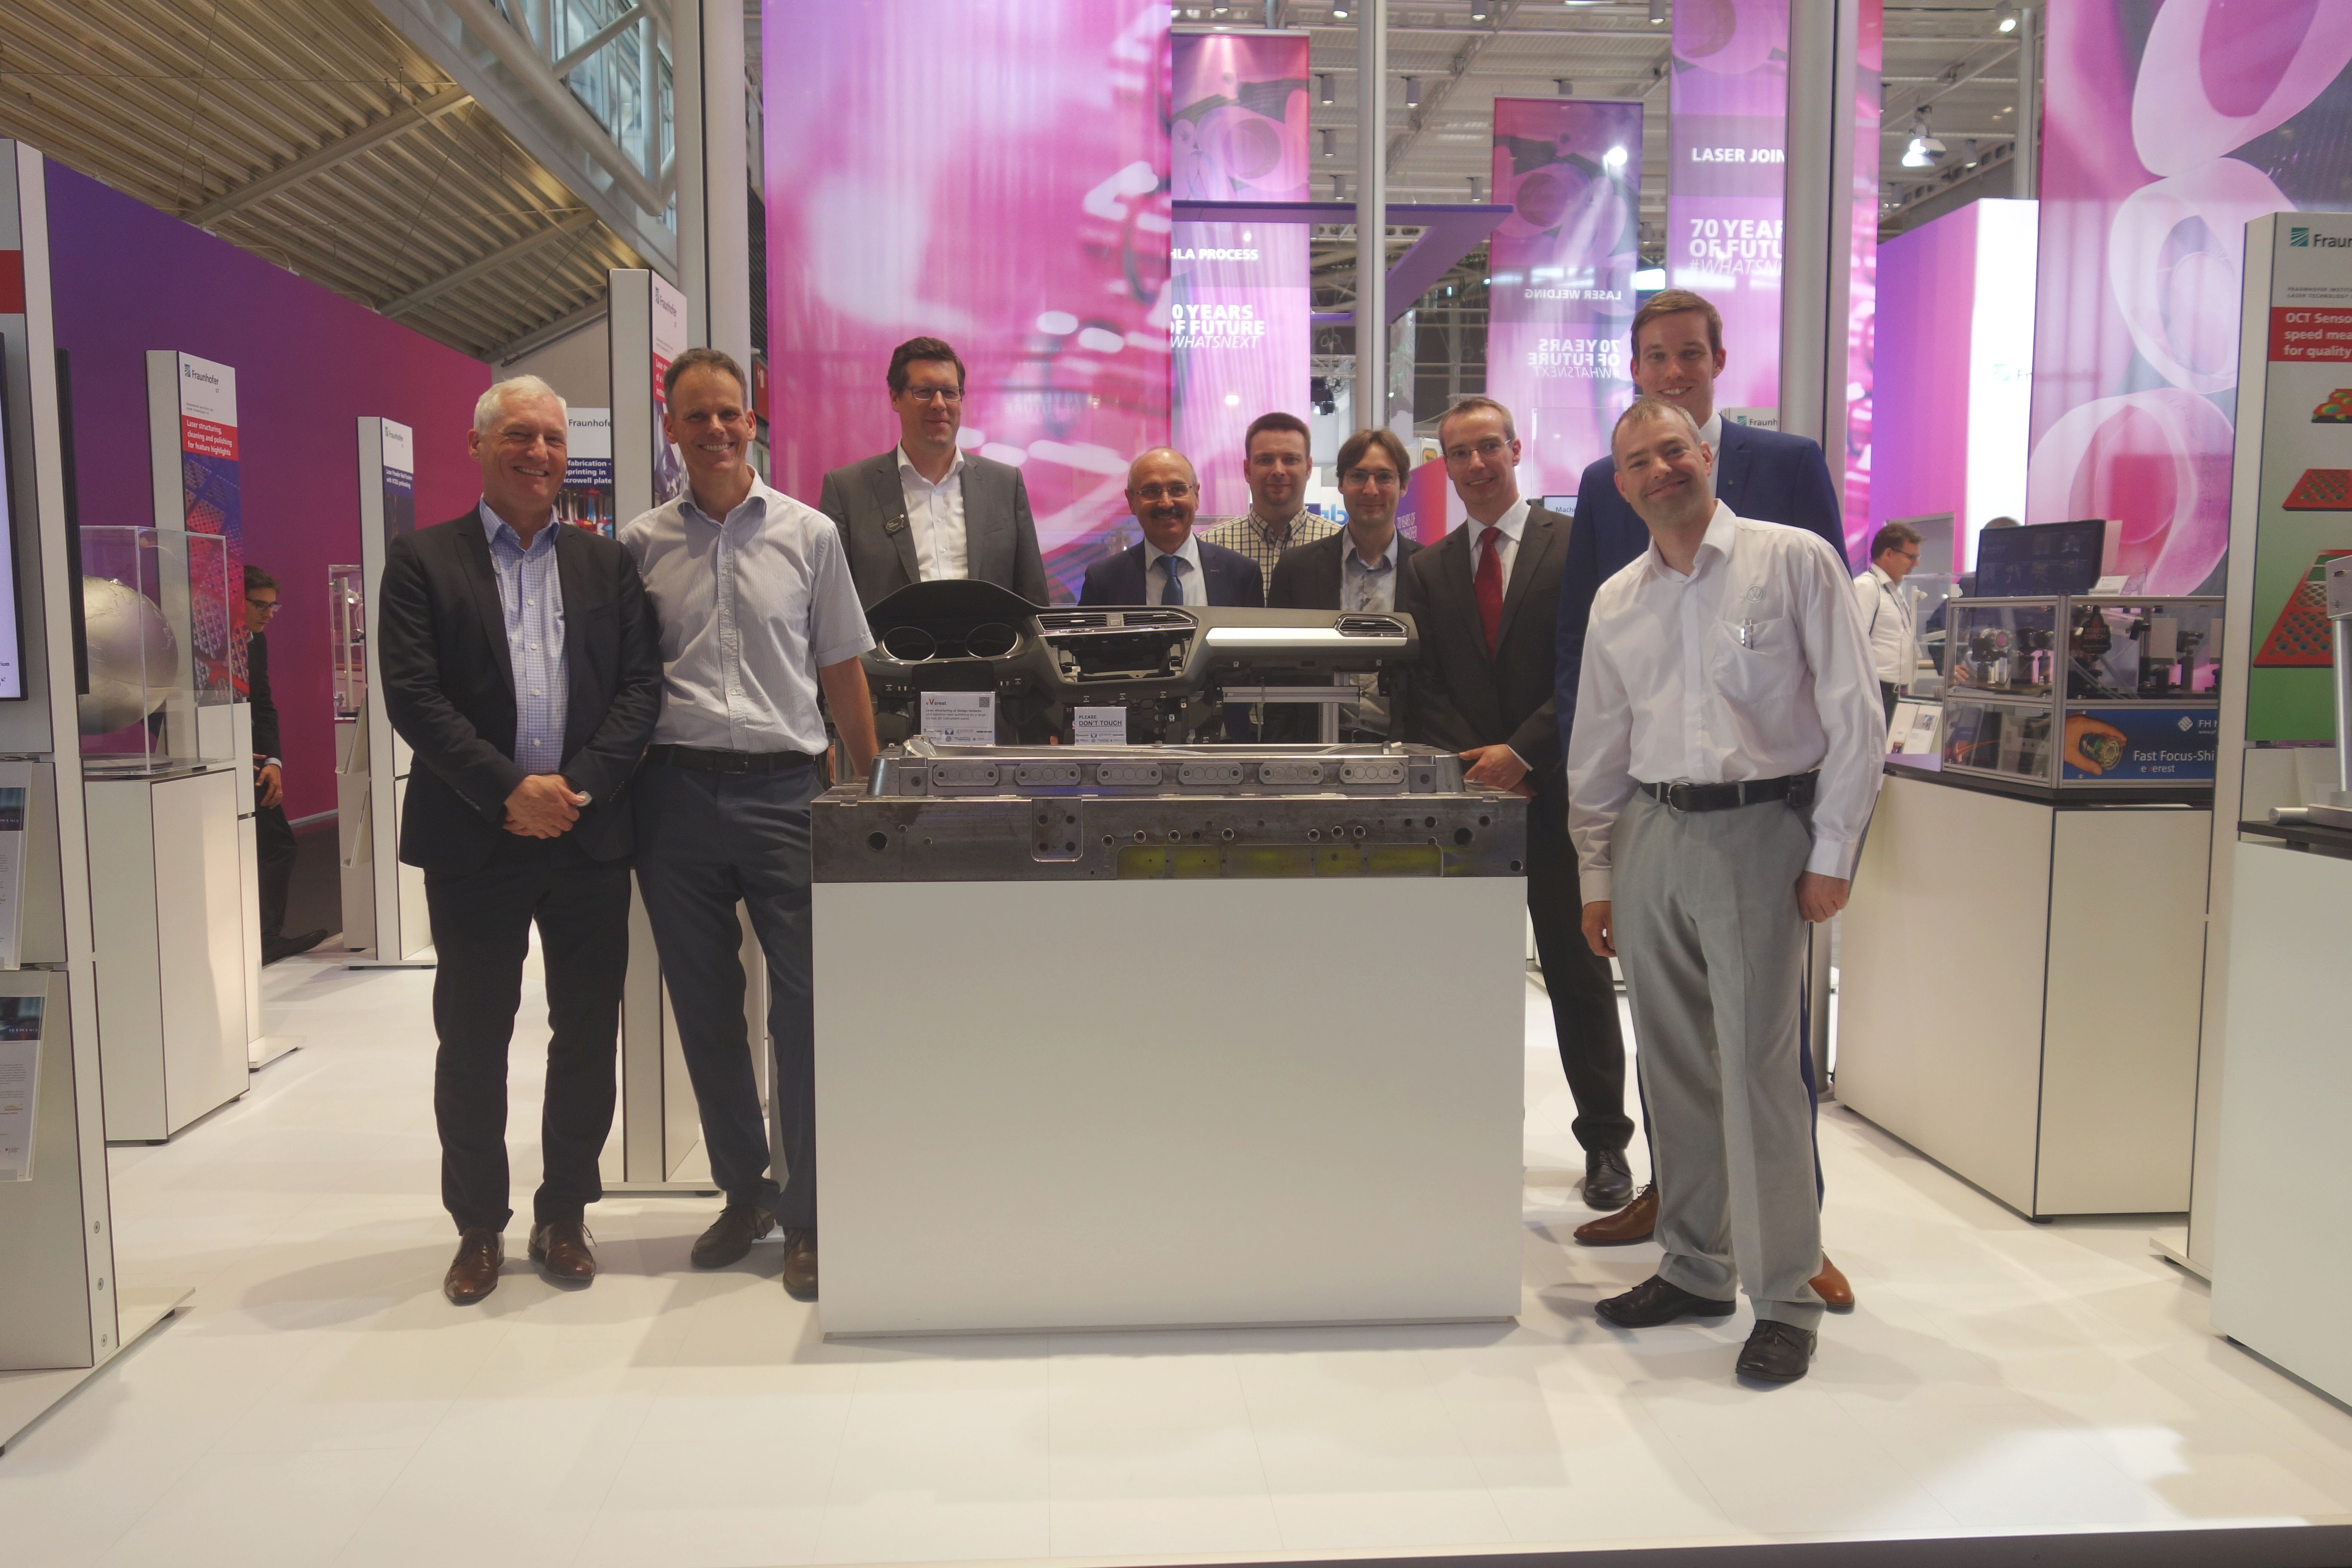 Representatives of the eVerest project partners at the Fraunhofer joint booth at the LASER World of PHOTONICS 2019 in Munich.